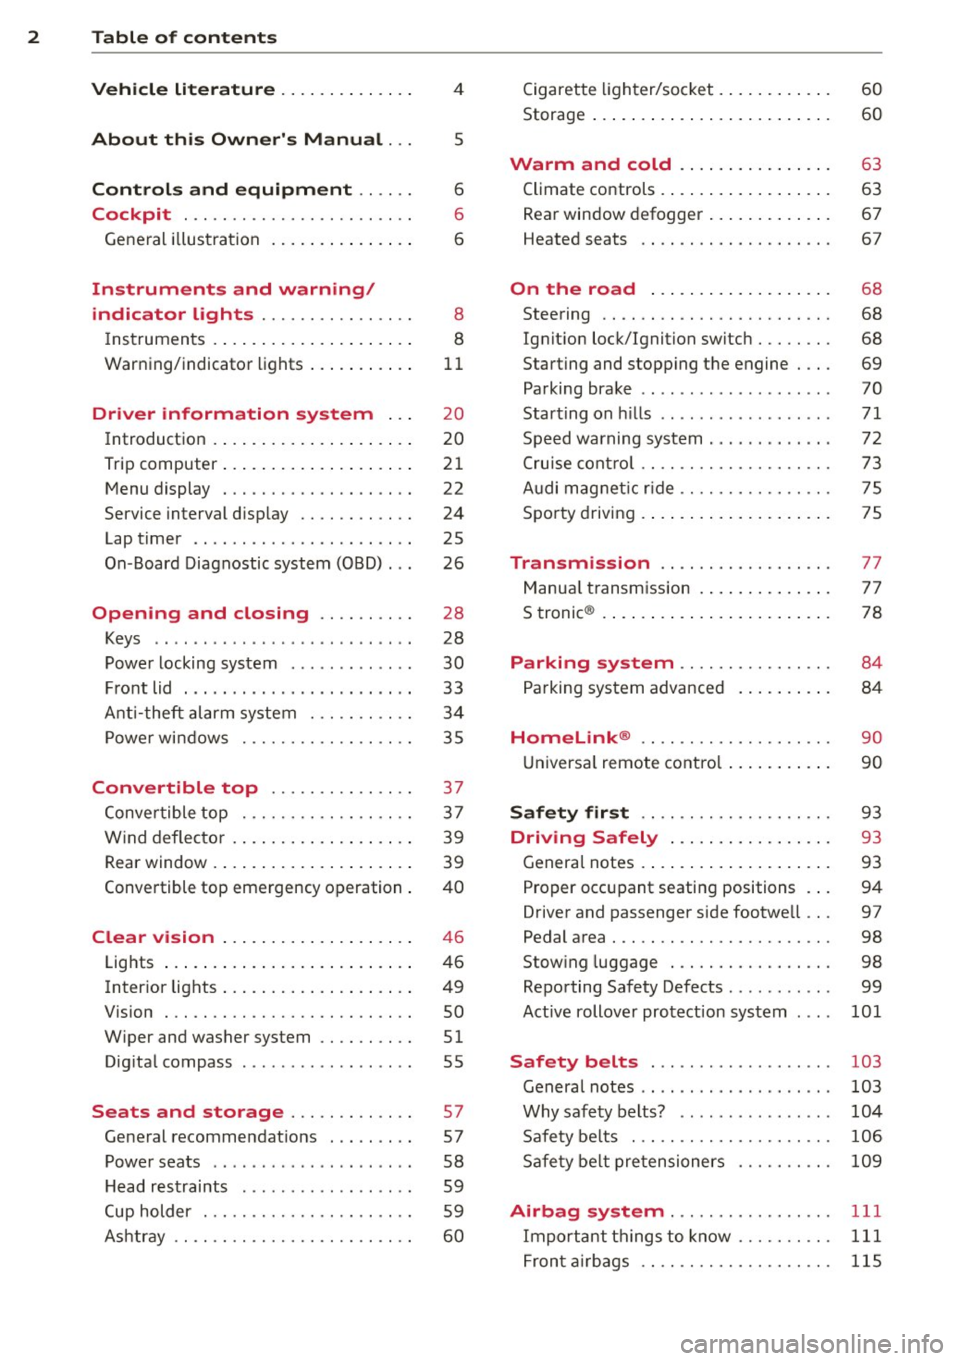 AUDI R8 SPYDER 2014  Owners Manual 2  Table  of  contents Vehicle  literature  .. .. .. .. .. ... . 
4 
About  this  Owners  Manual . . . 5 
Controls  and  equipment  .. ...  . 
Cockpit  ................ .... .. . . 
General  illus tr